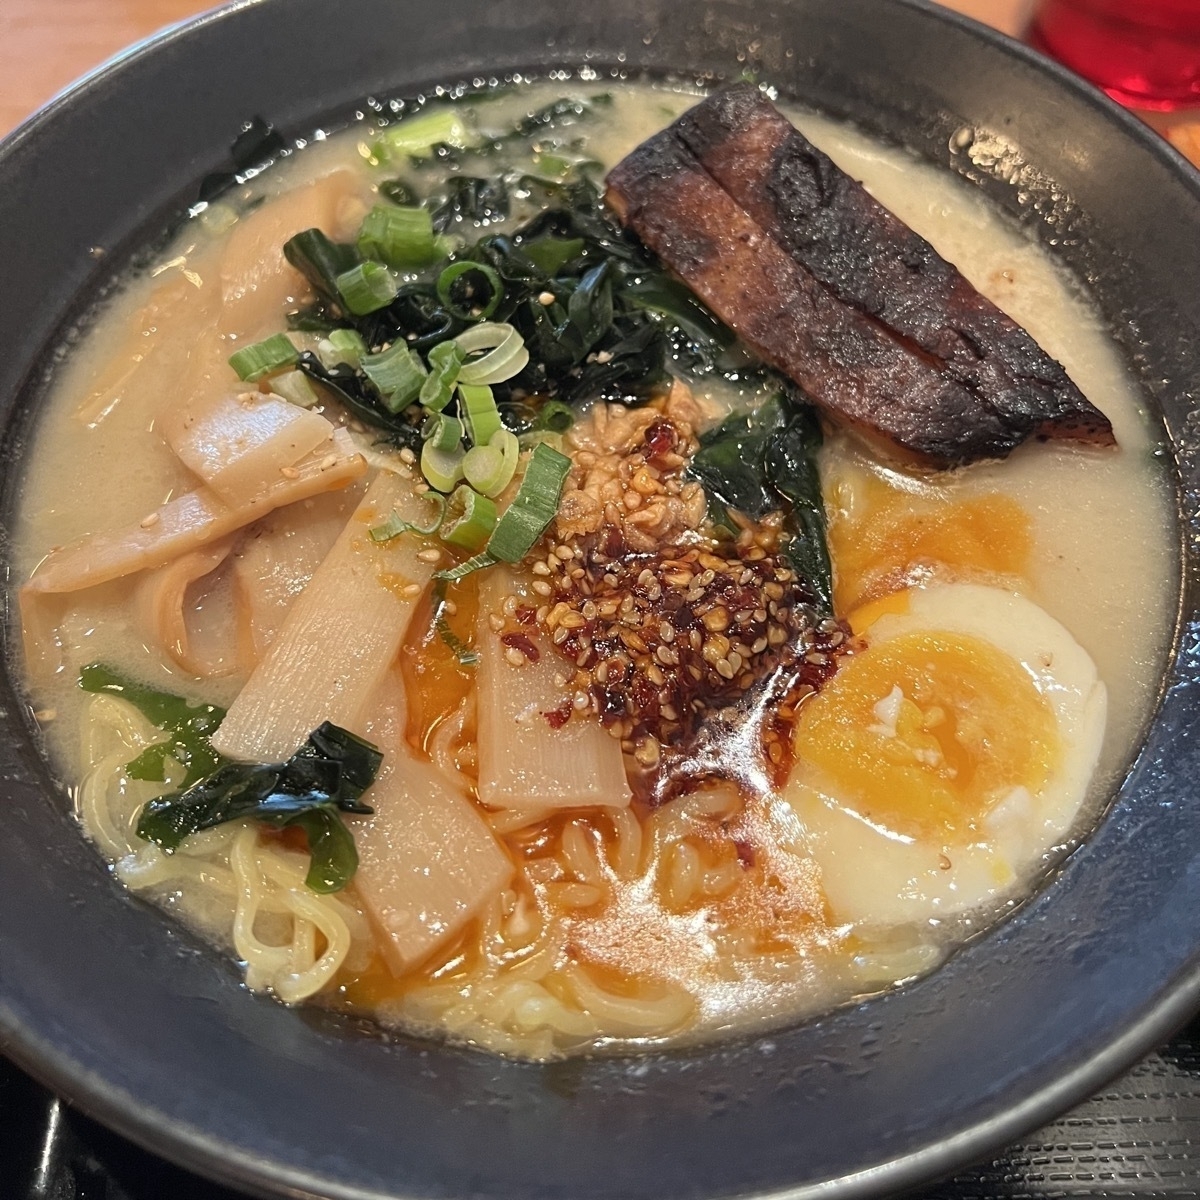 ramen with chili seasame oil, soft boiled egg, and pork